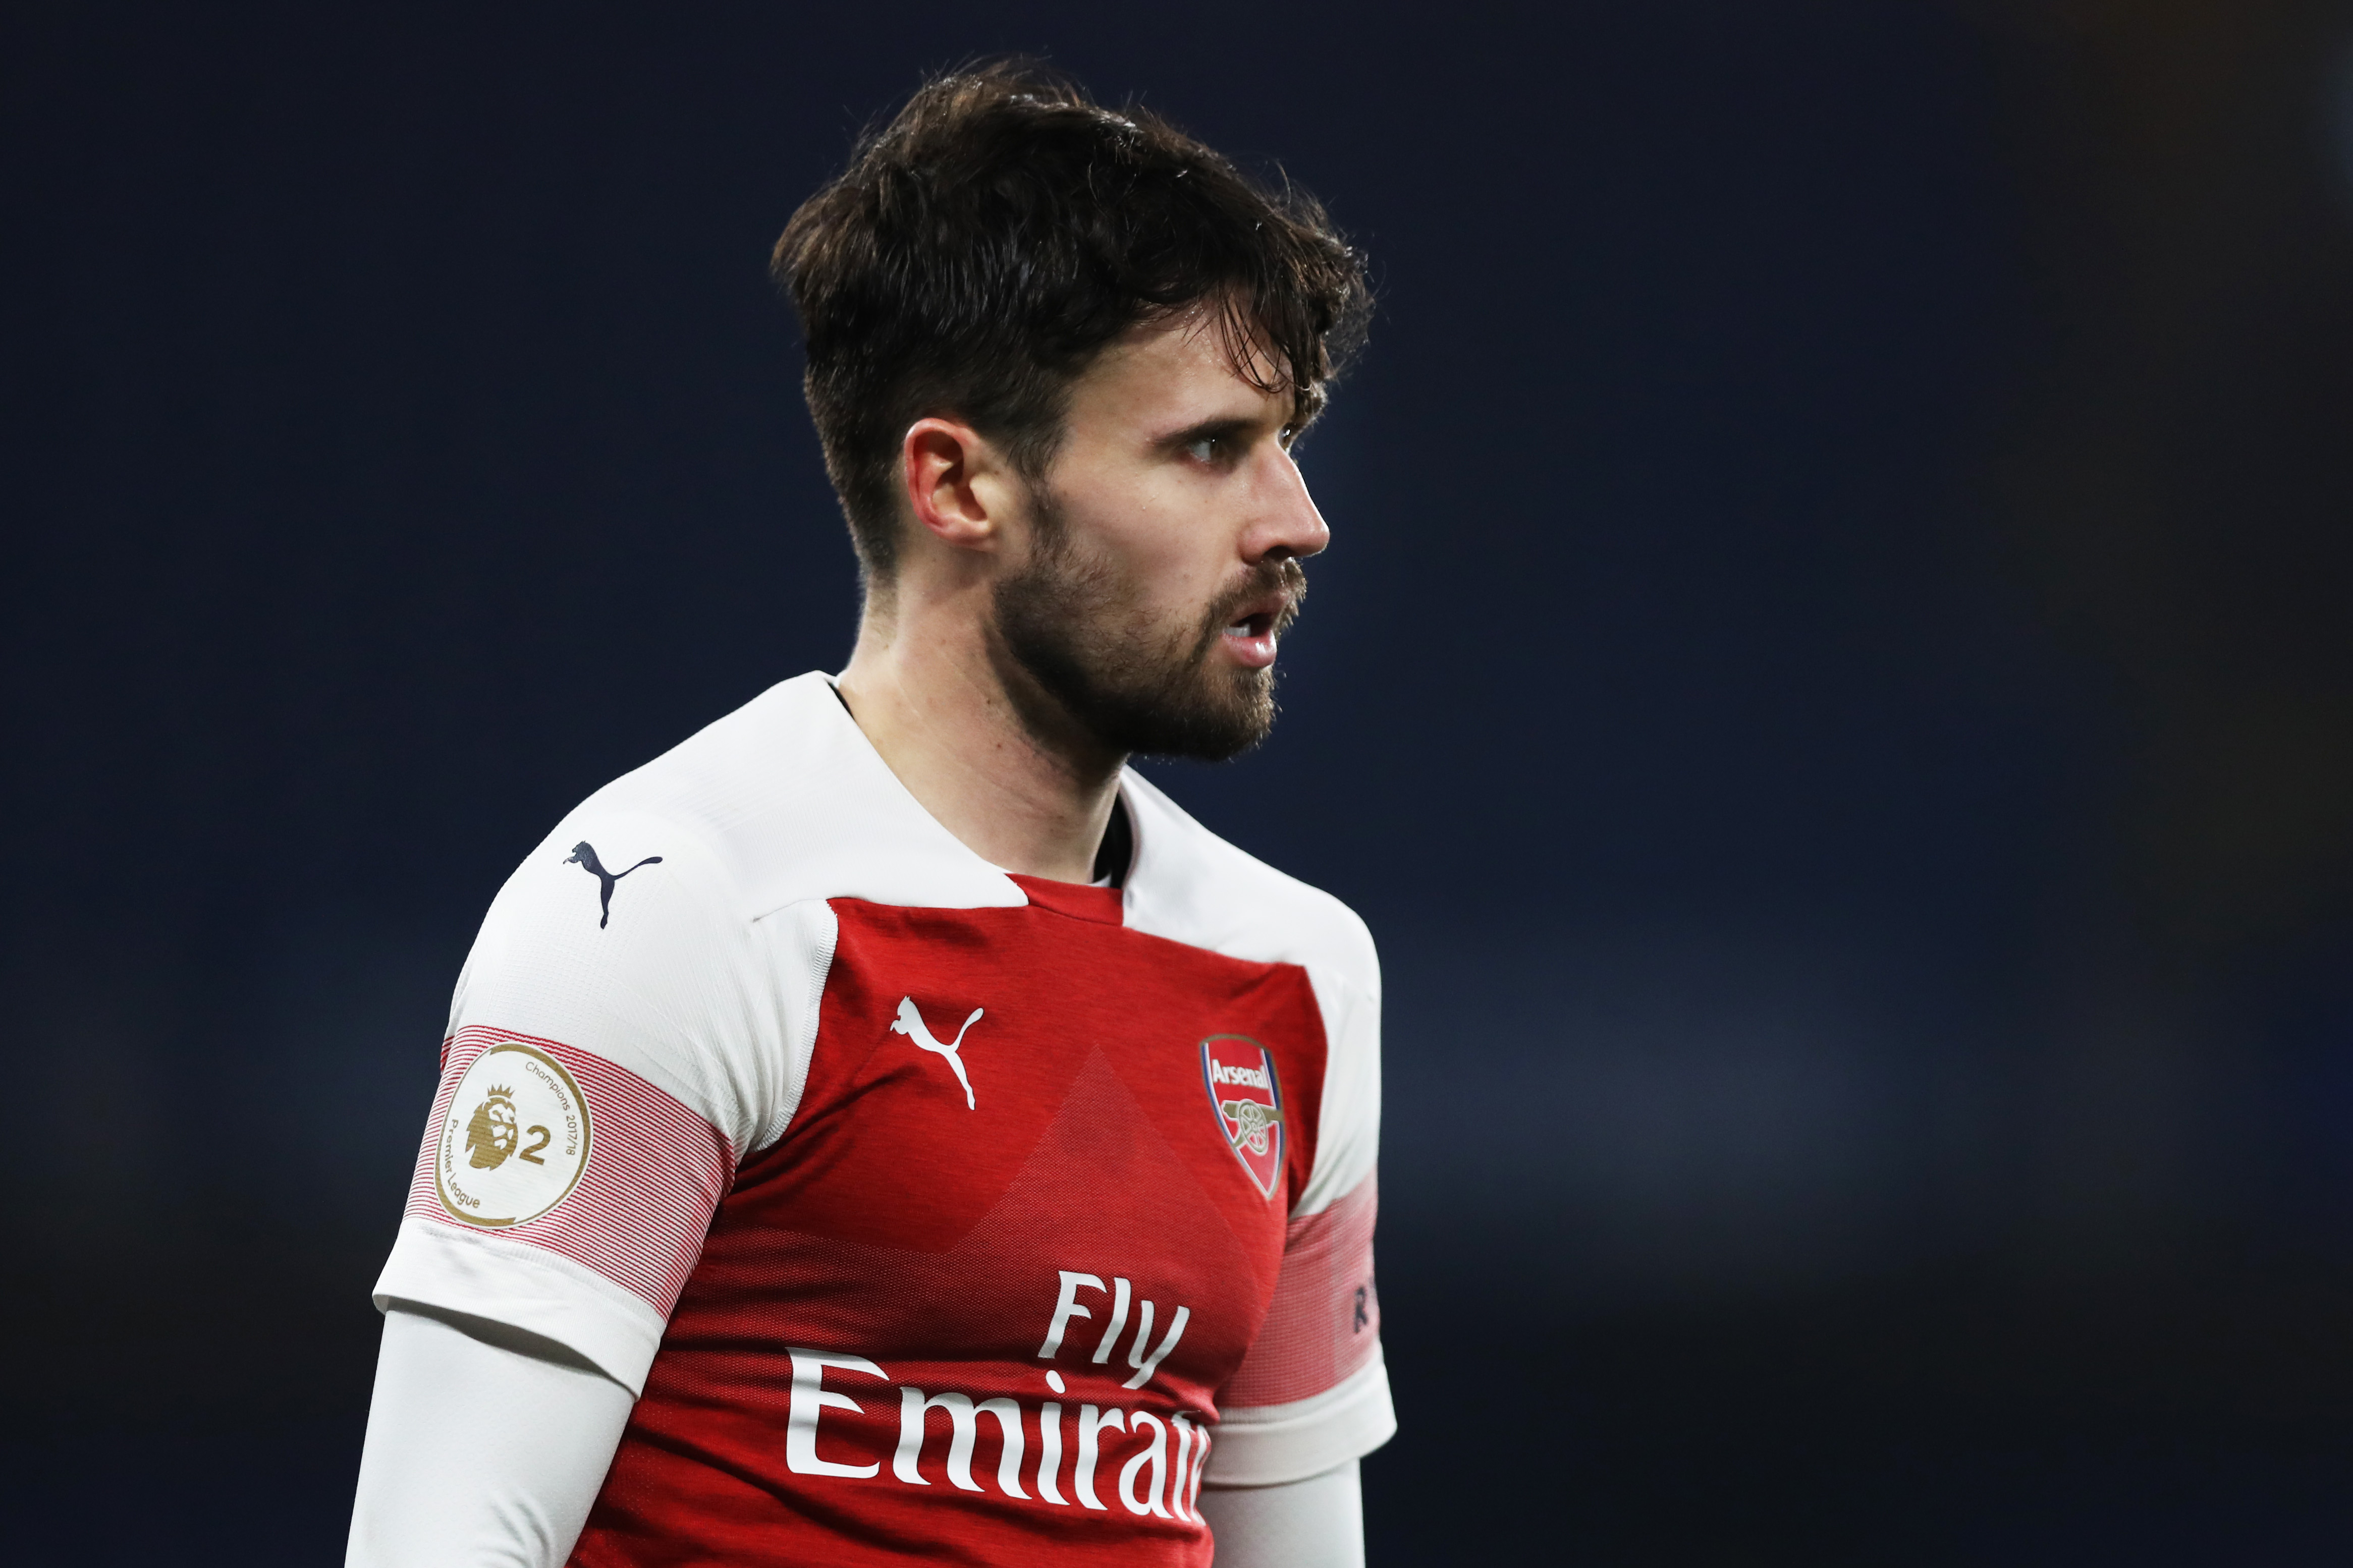 LONDON, ENGLAND - APRIL 15:  Carl Jenkinson of Arsenal looks on  during the Premier League 2 match between Chelsea and Arsenal at Stamford Bridge on April 15, 2019 in London, England. (Photo by Naomi Baker/Getty Images)